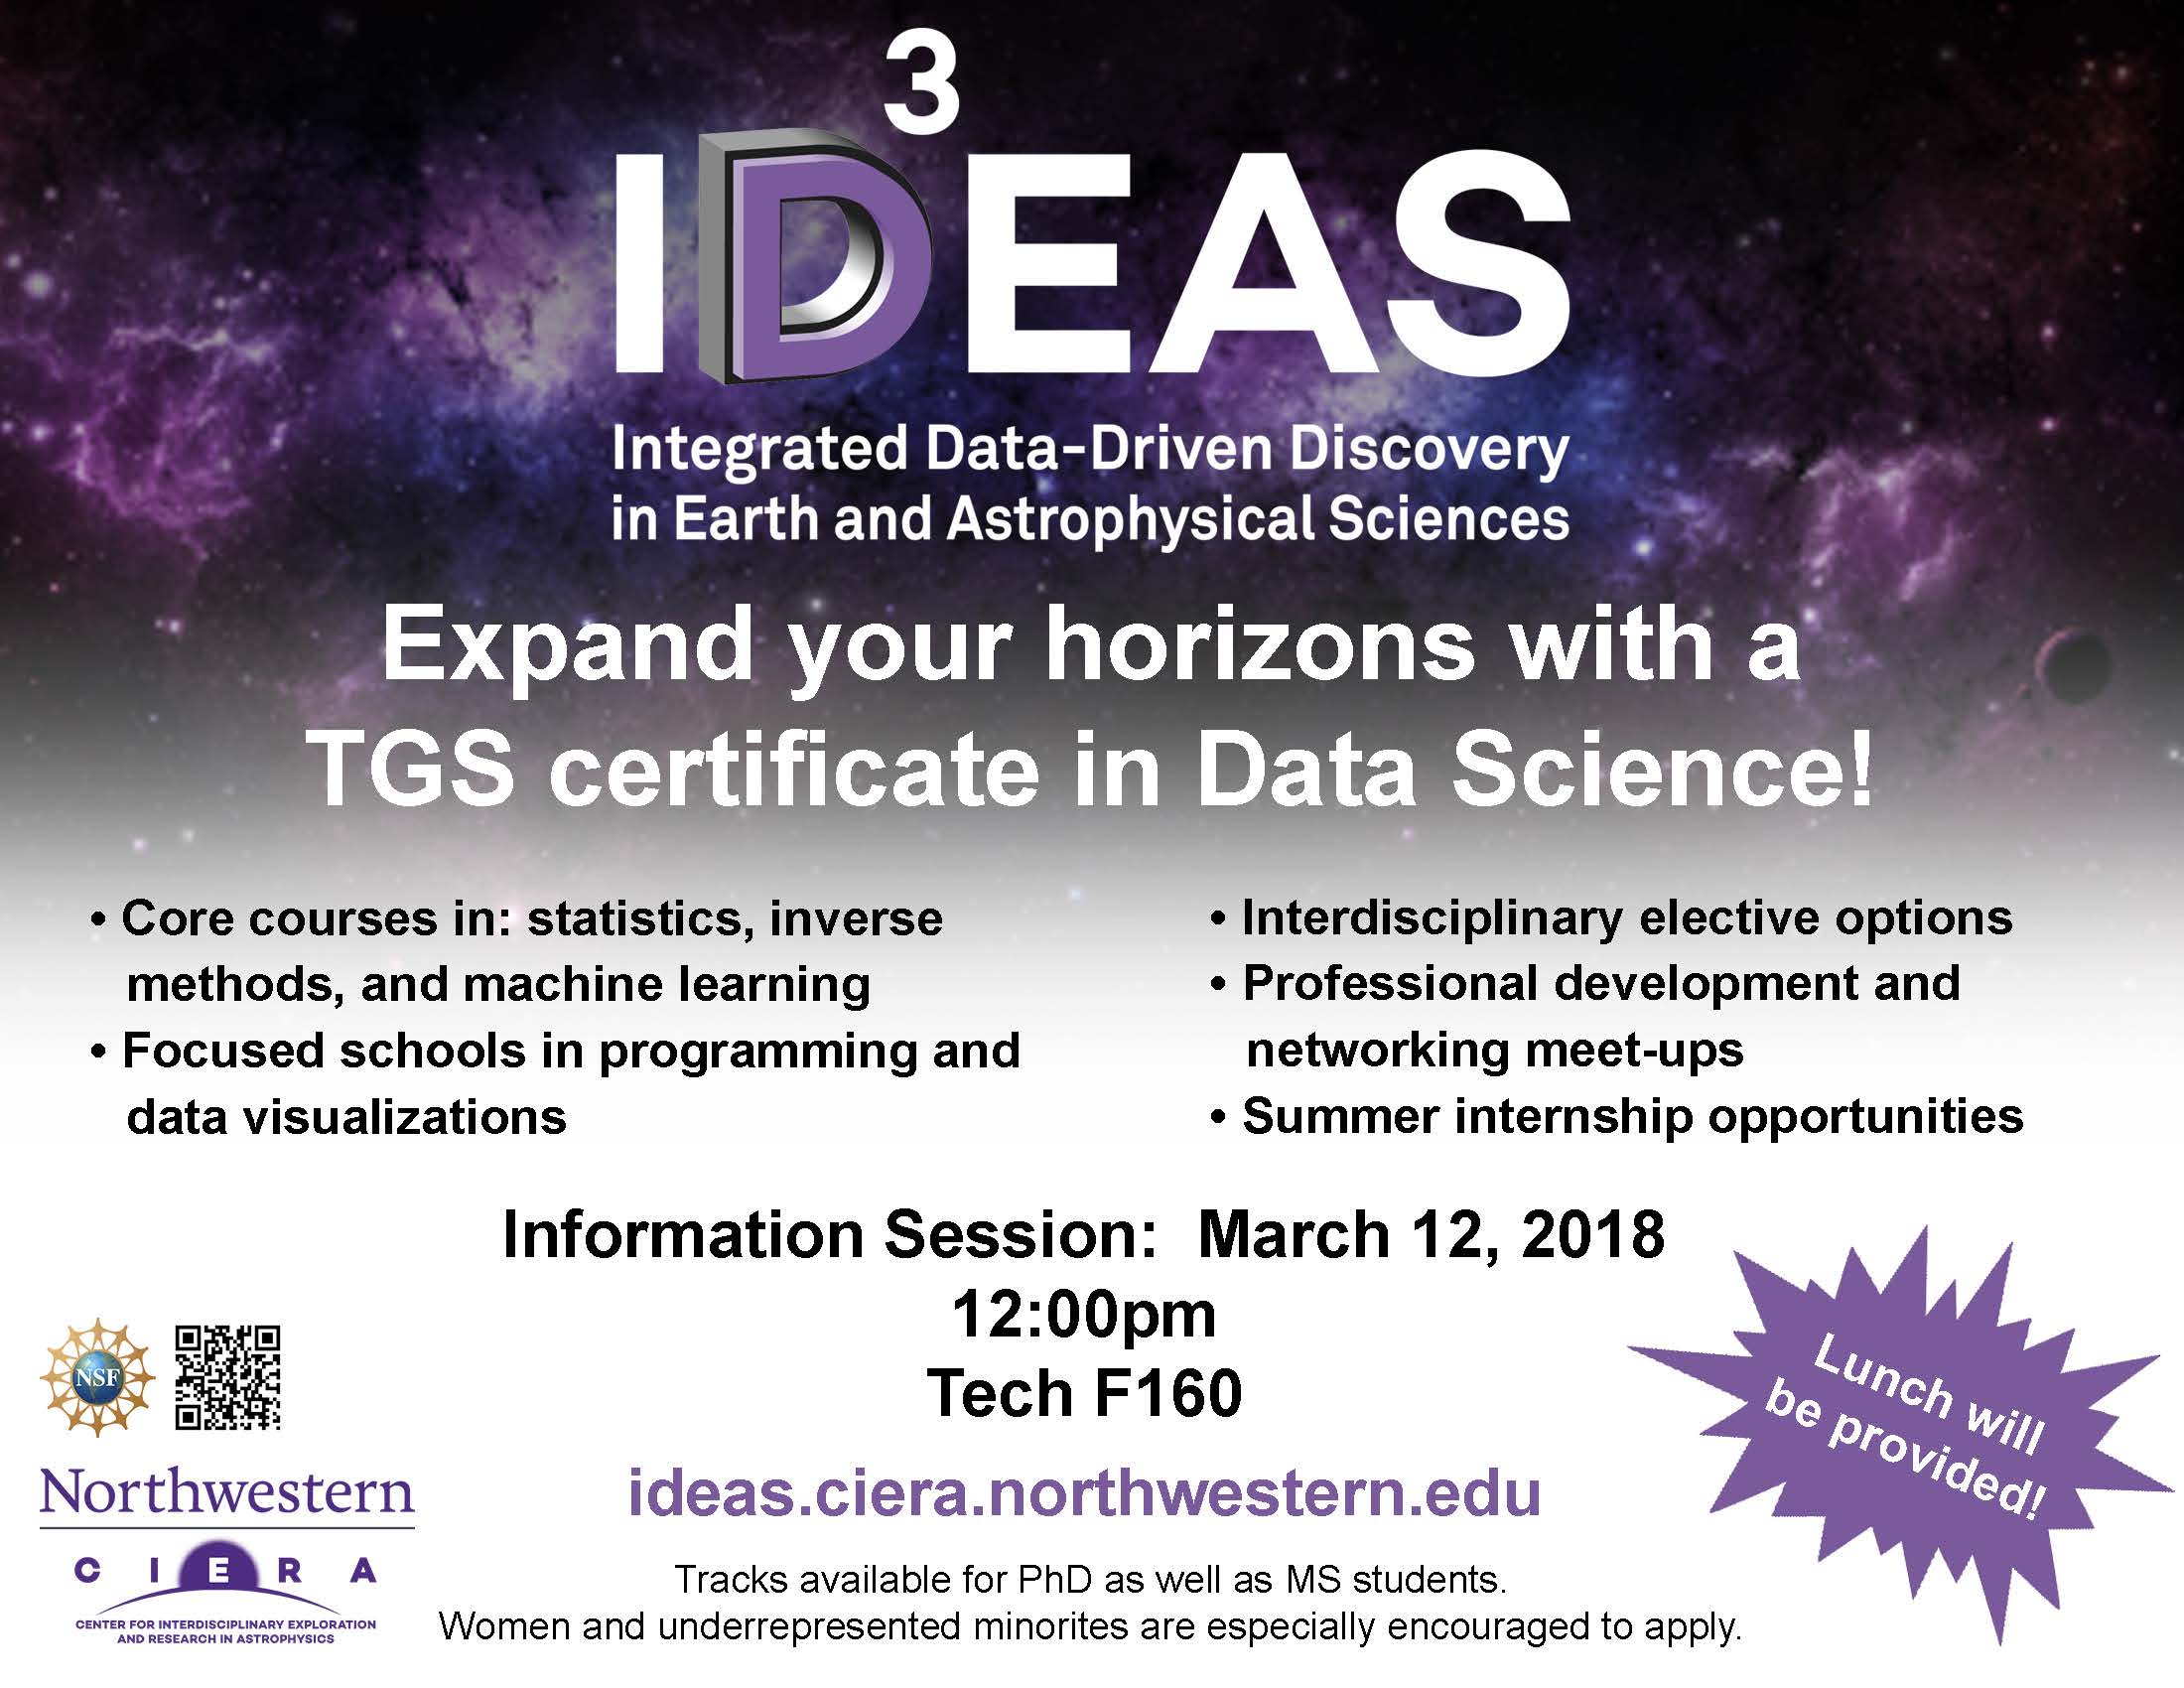 IDEAS Information Session for Potential 2018 Cohort Members to be Held 3/12/18